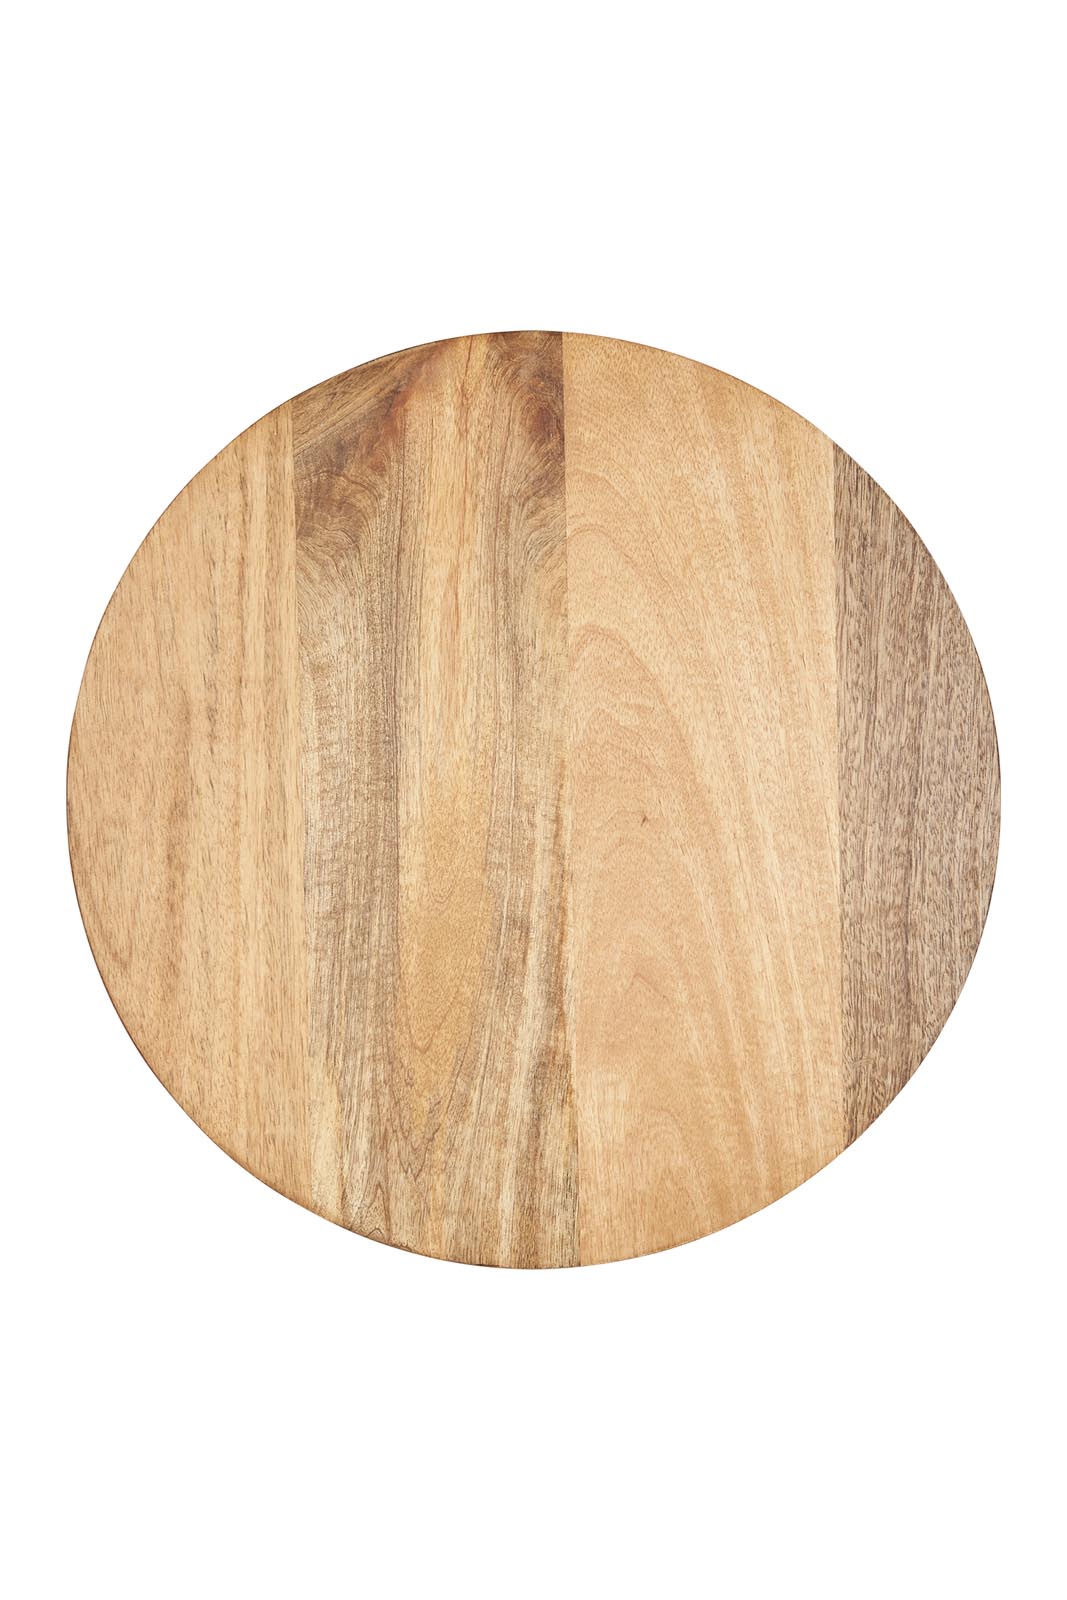 Raine Lazy Susan - Natural Wood - eb&ive Table Top